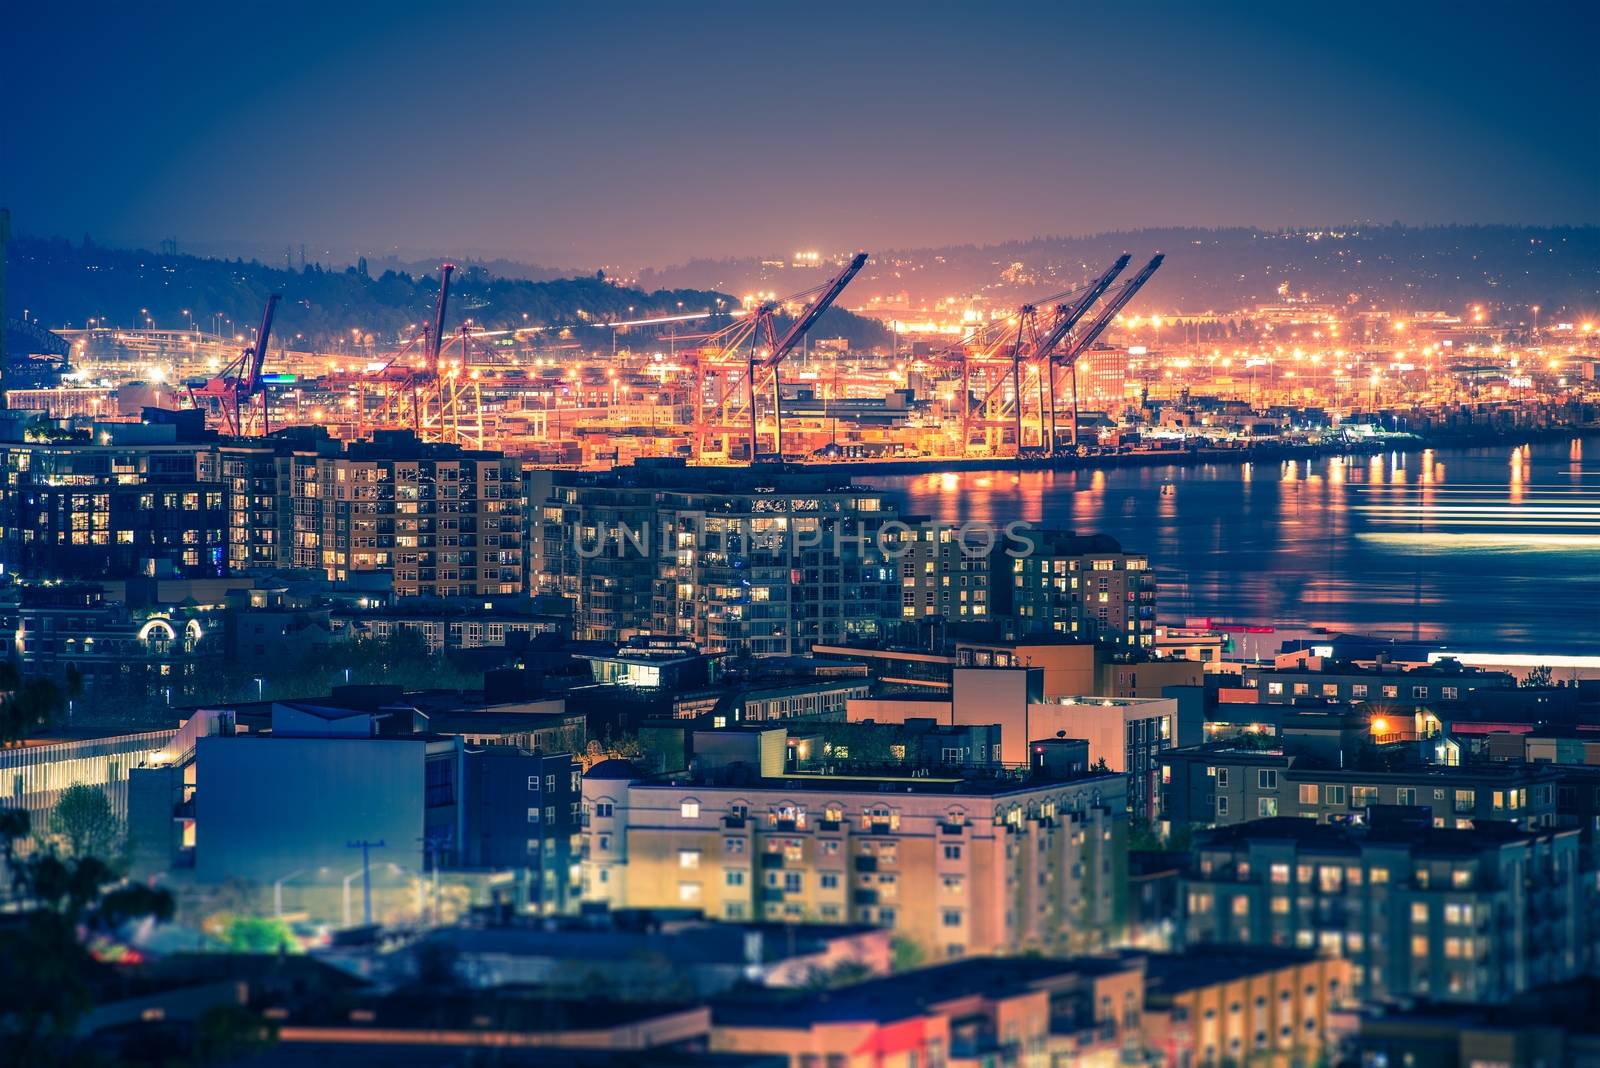 Port of Seattle at Night by welcomia